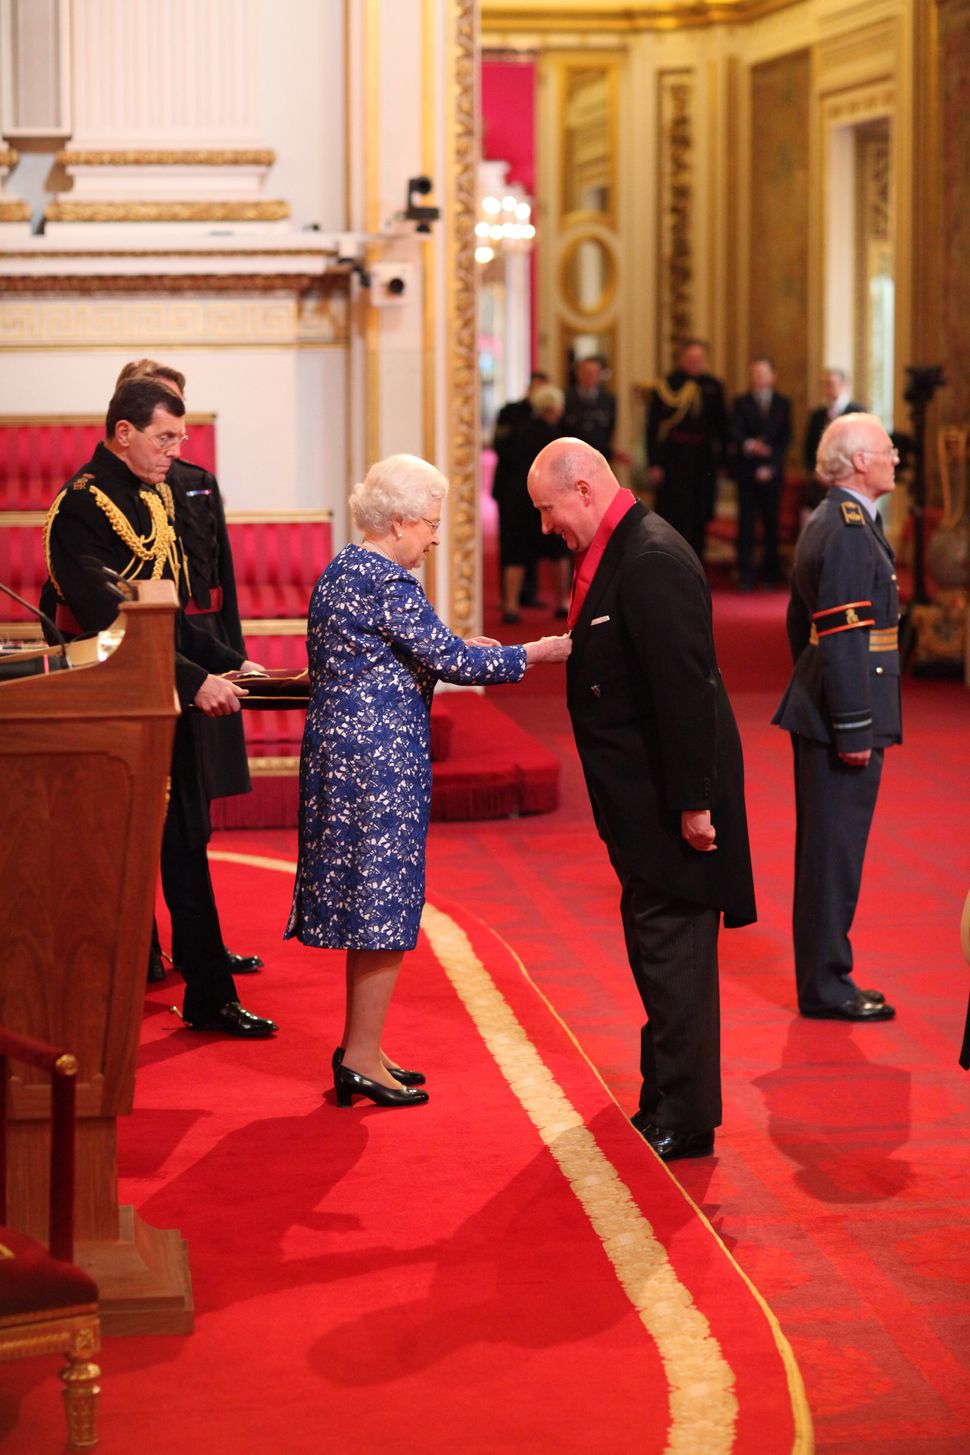 The Rt. Hon. Sir Christopher Geidt was made a Knight Commander of the Order of the Bath in 2014 by his then boss, Queen Elizabeth II.